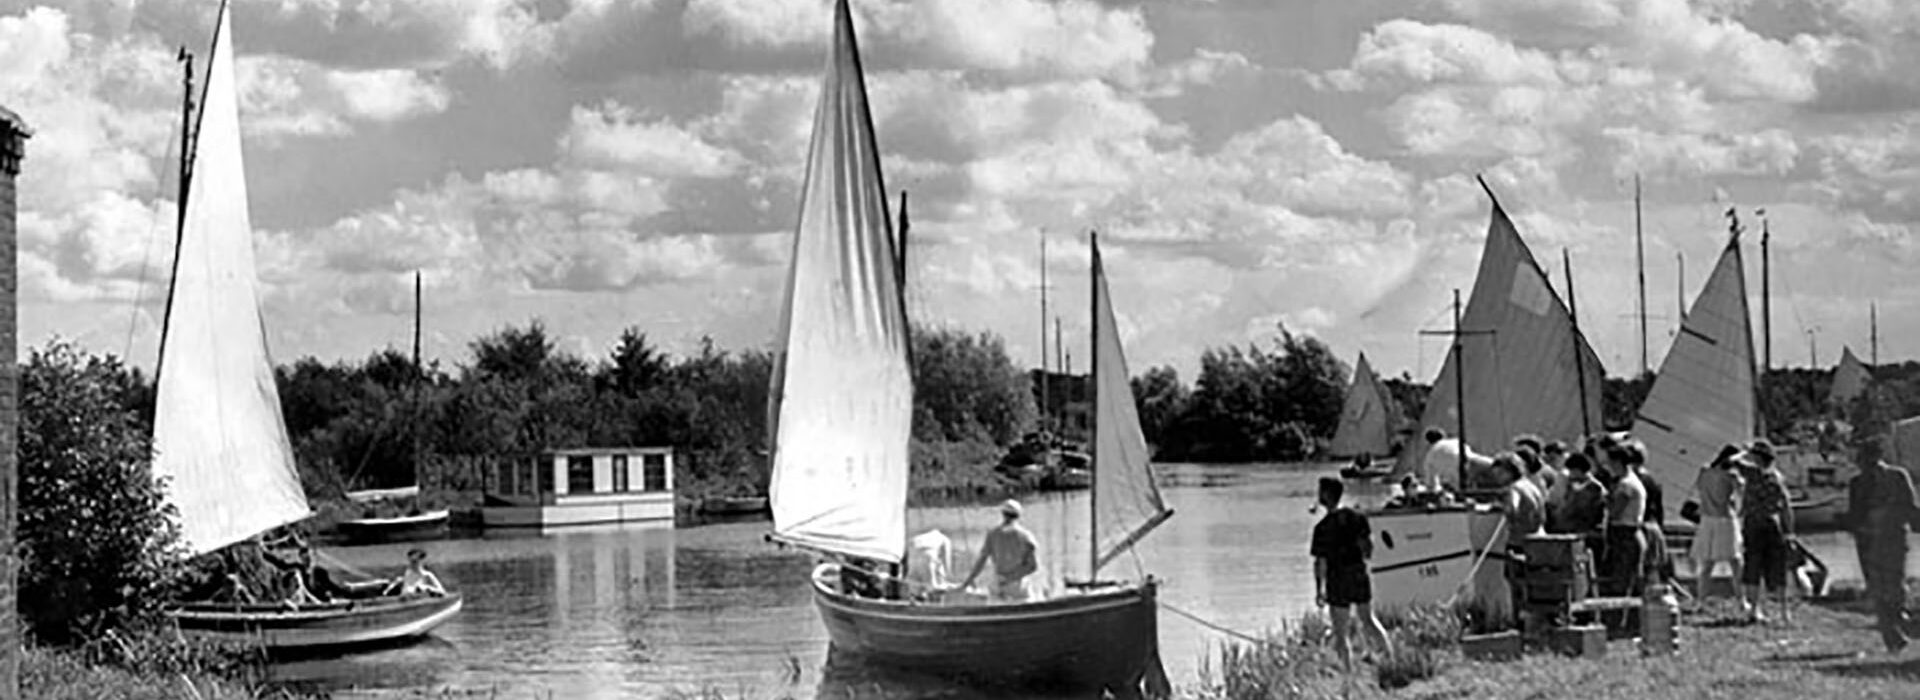 History of the Broads in Brief